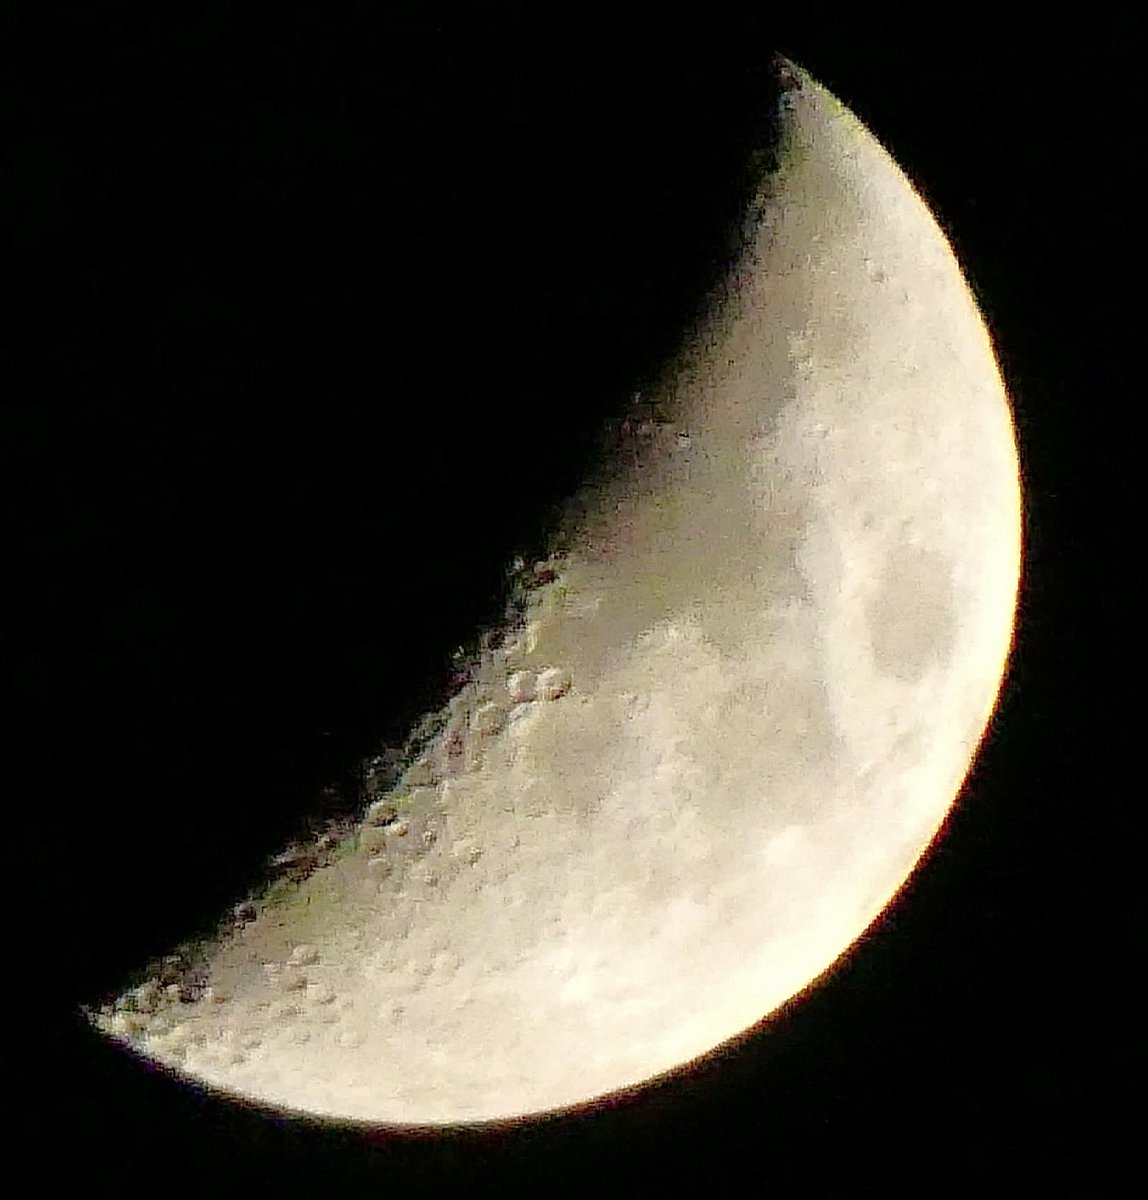 Managed to get a good shot of the moon late last night! Hope you all slept well and that you have a good day. 😊🌛💫☀️